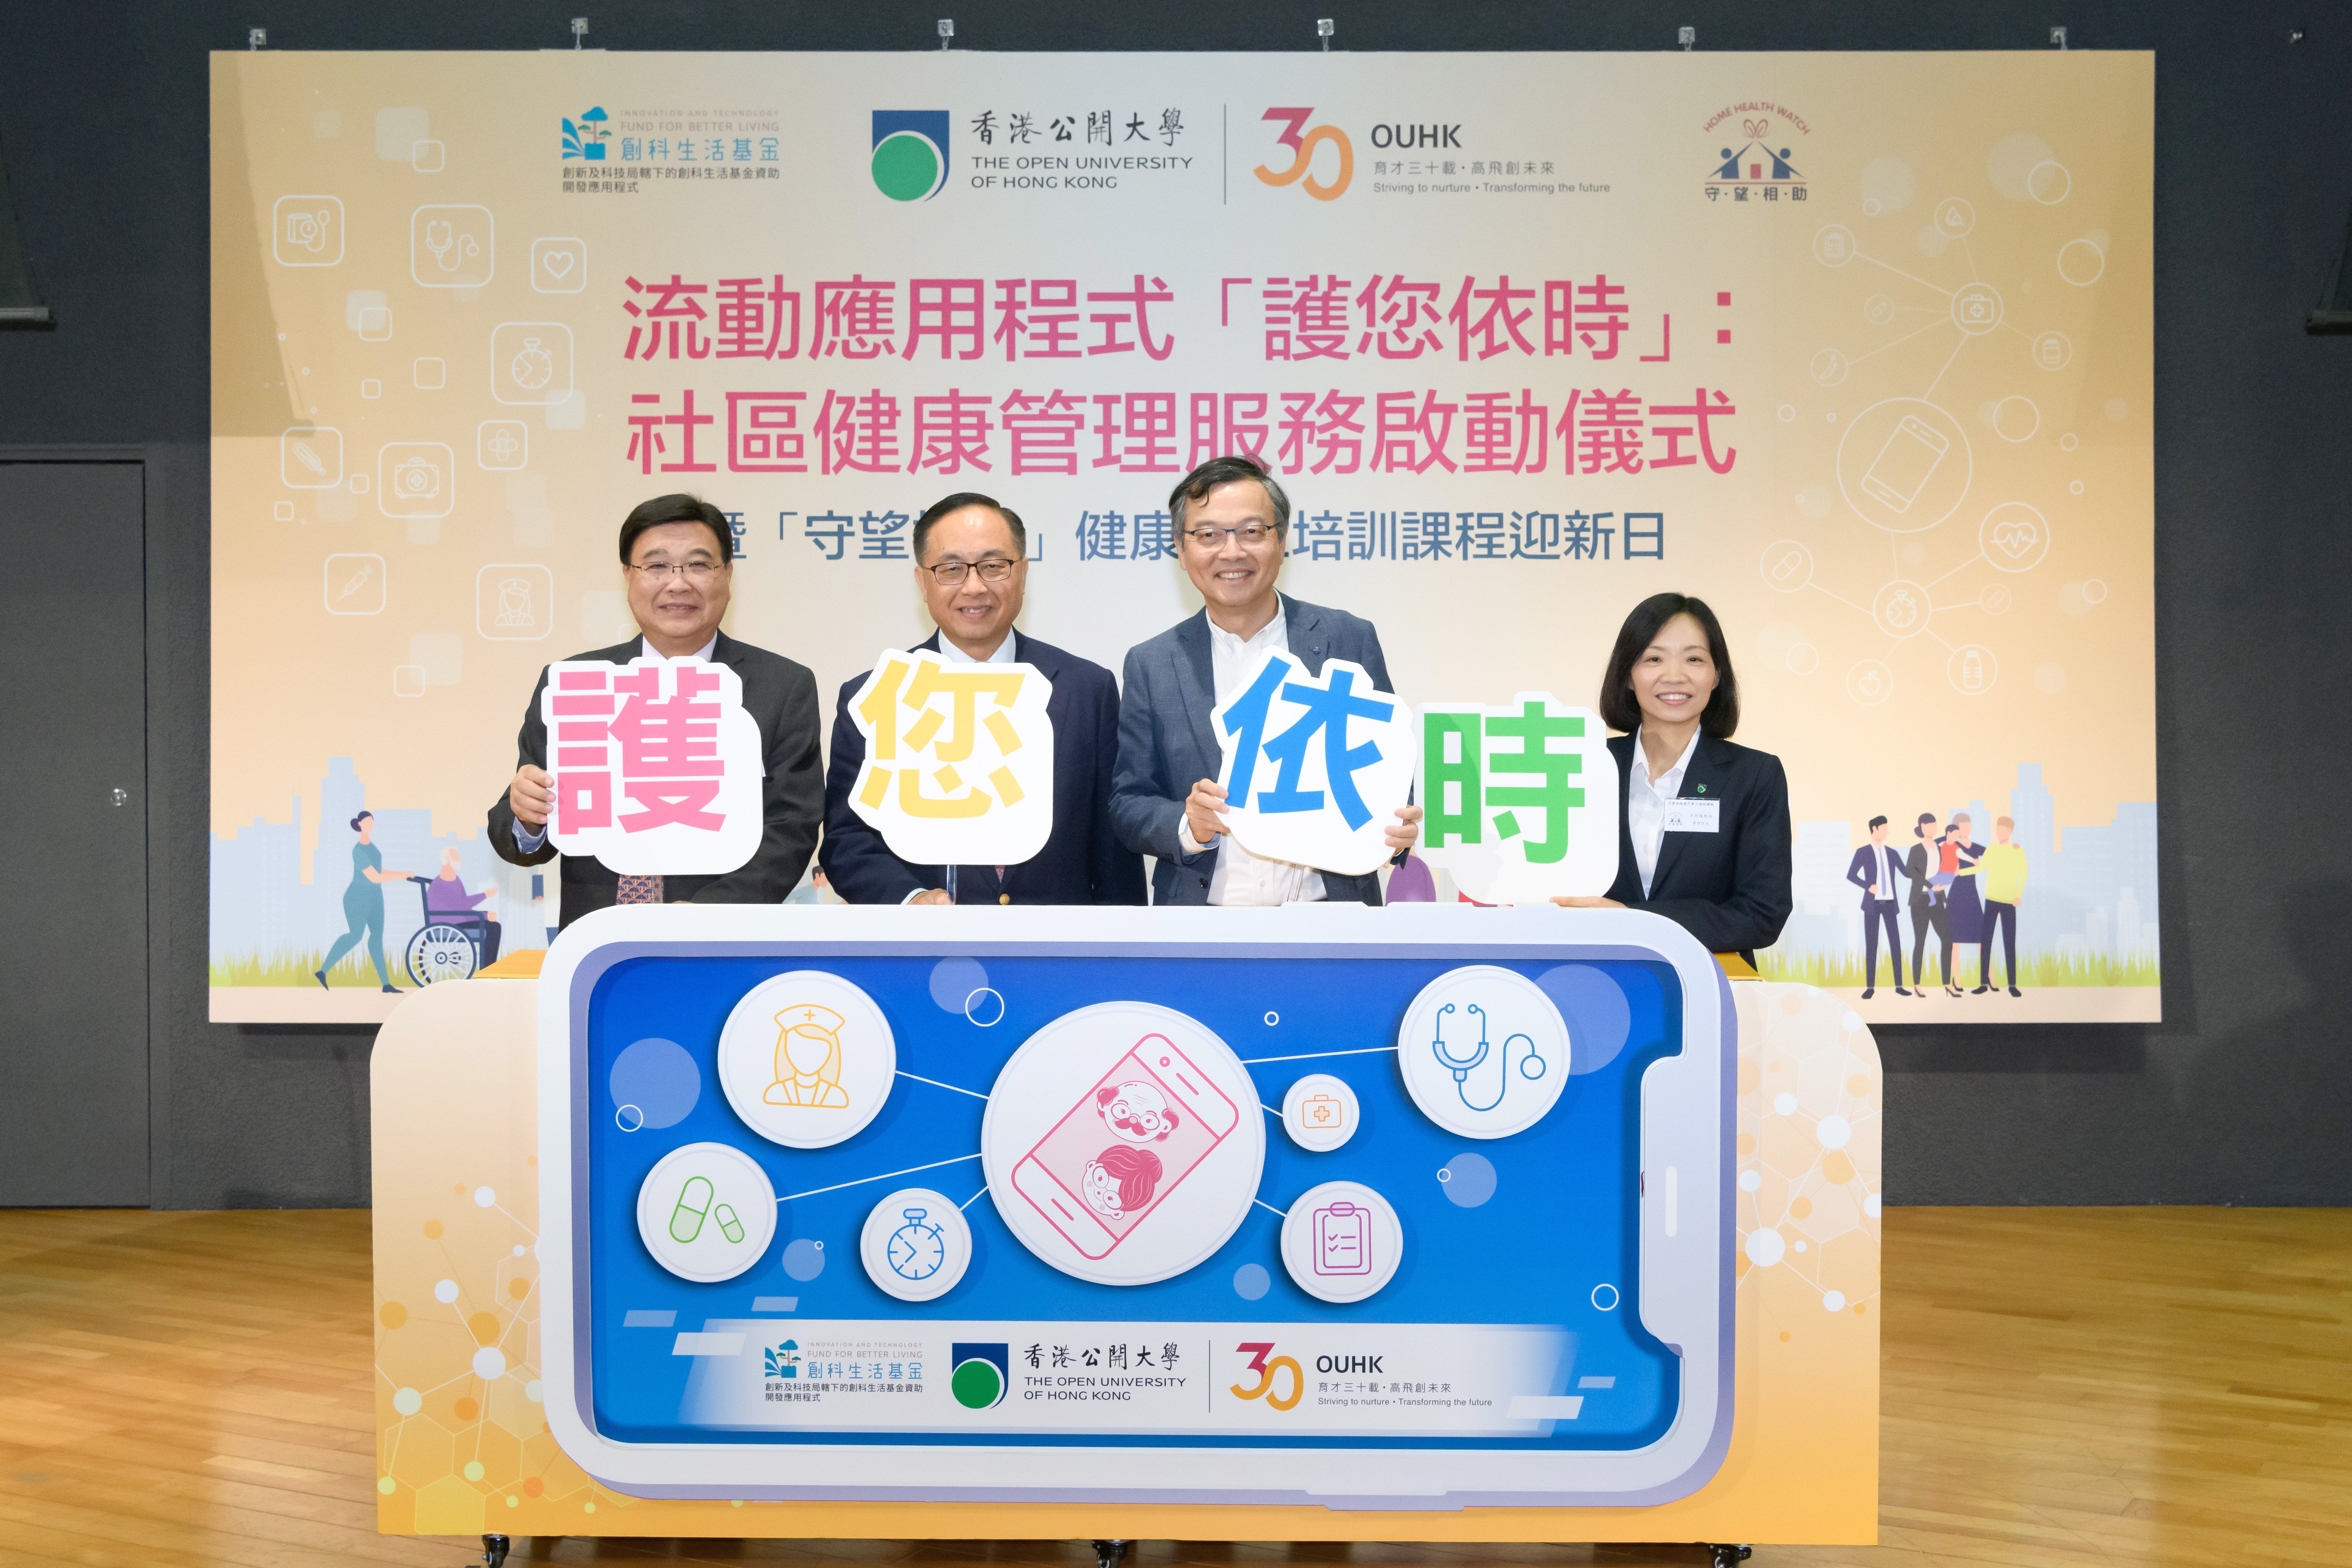 (From left) OUHK President Prof. Yuk-Shan Wong, Secretary for Innovation and Technology Mr Nicholas W. Yang, Chairman of the Elderly Commission Dr Lam Ching-choi, and Acting Dean of the OUHK School of Nursing and Health Studies Prof. Linda Lee Yin-king officiate at the kick-off ceremony of the eCare app.